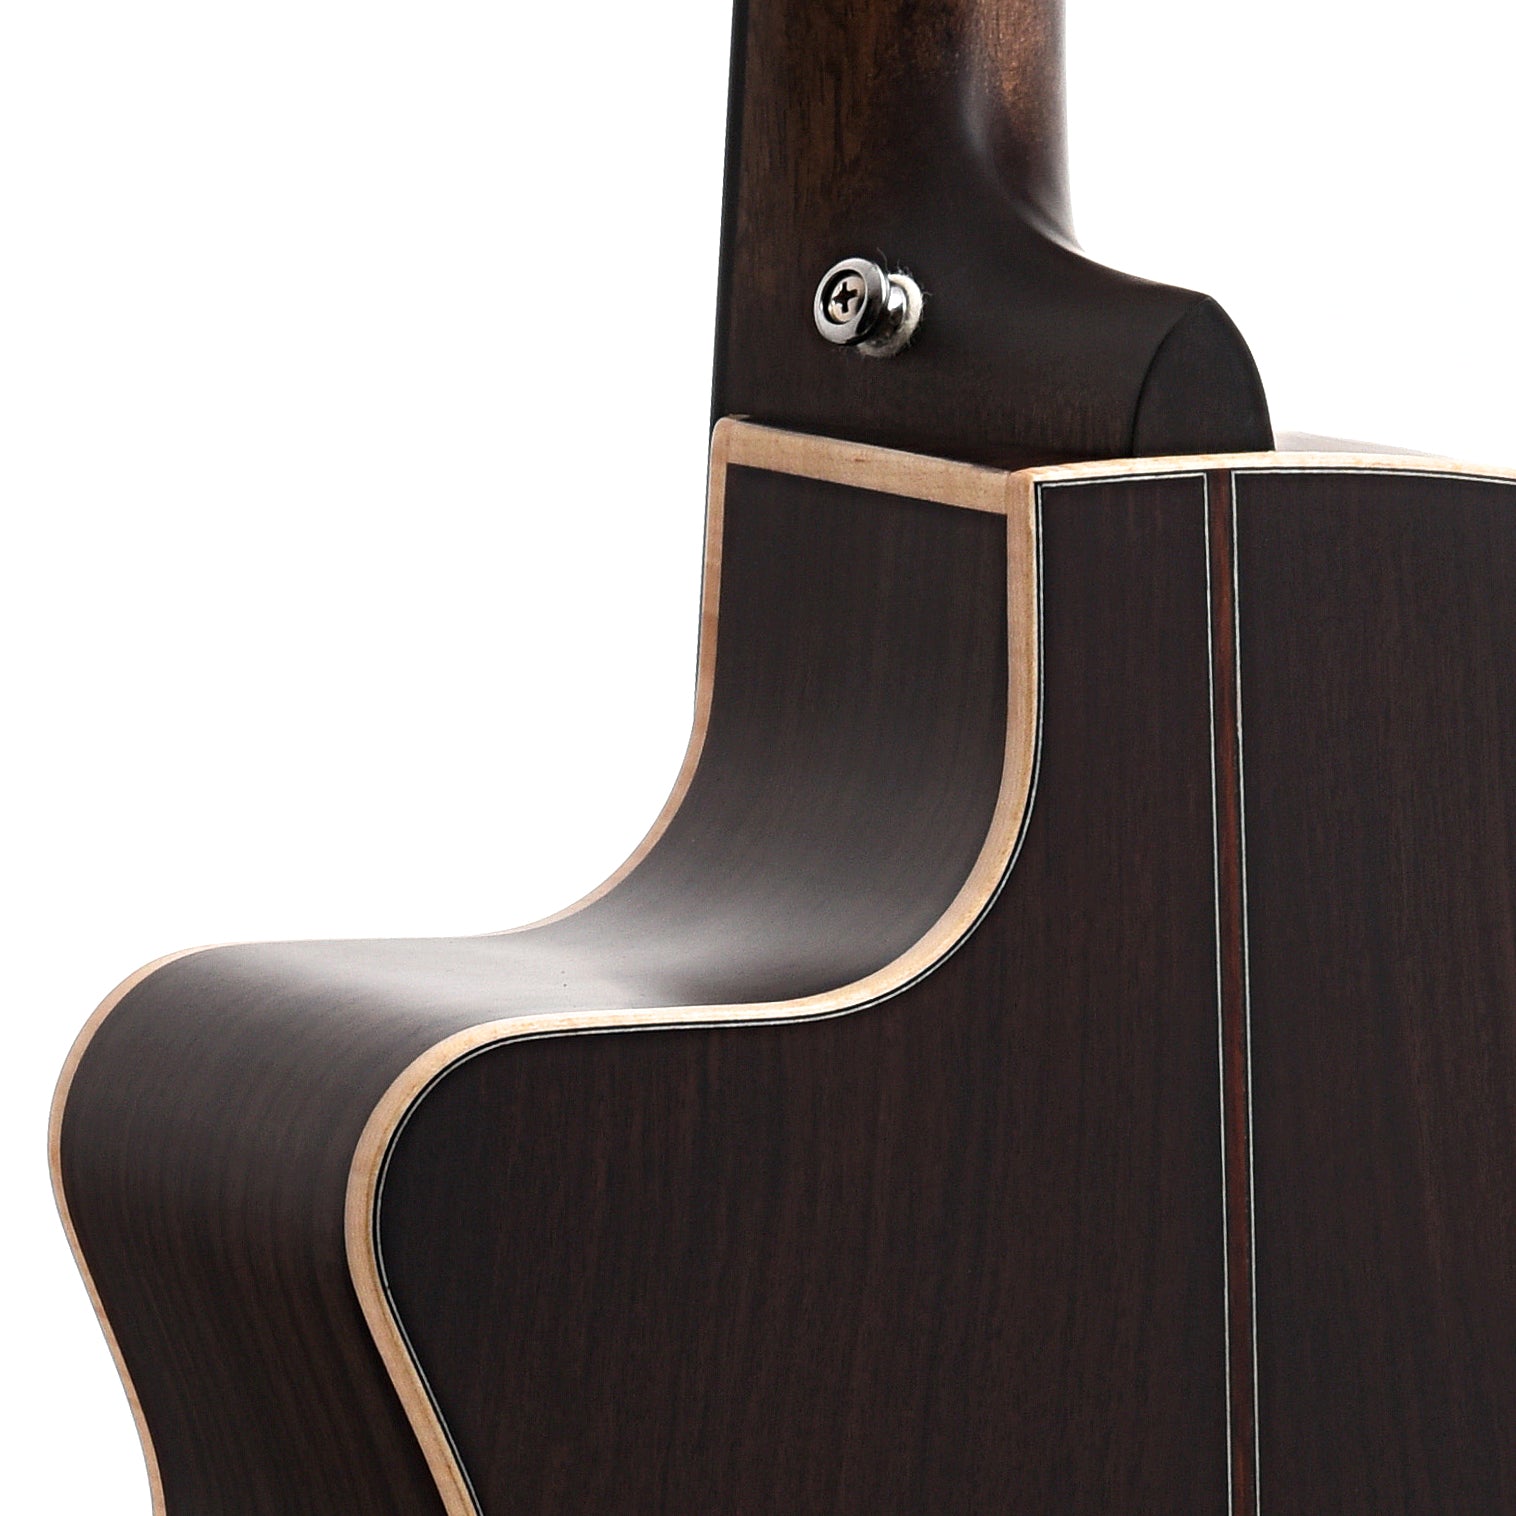 Image 9 of Walden Supranatura G3030RCE Acoustic-Electric Guitar & Case - SKU# G3030RCE : Product Type Flat-top Guitars : Elderly Instruments